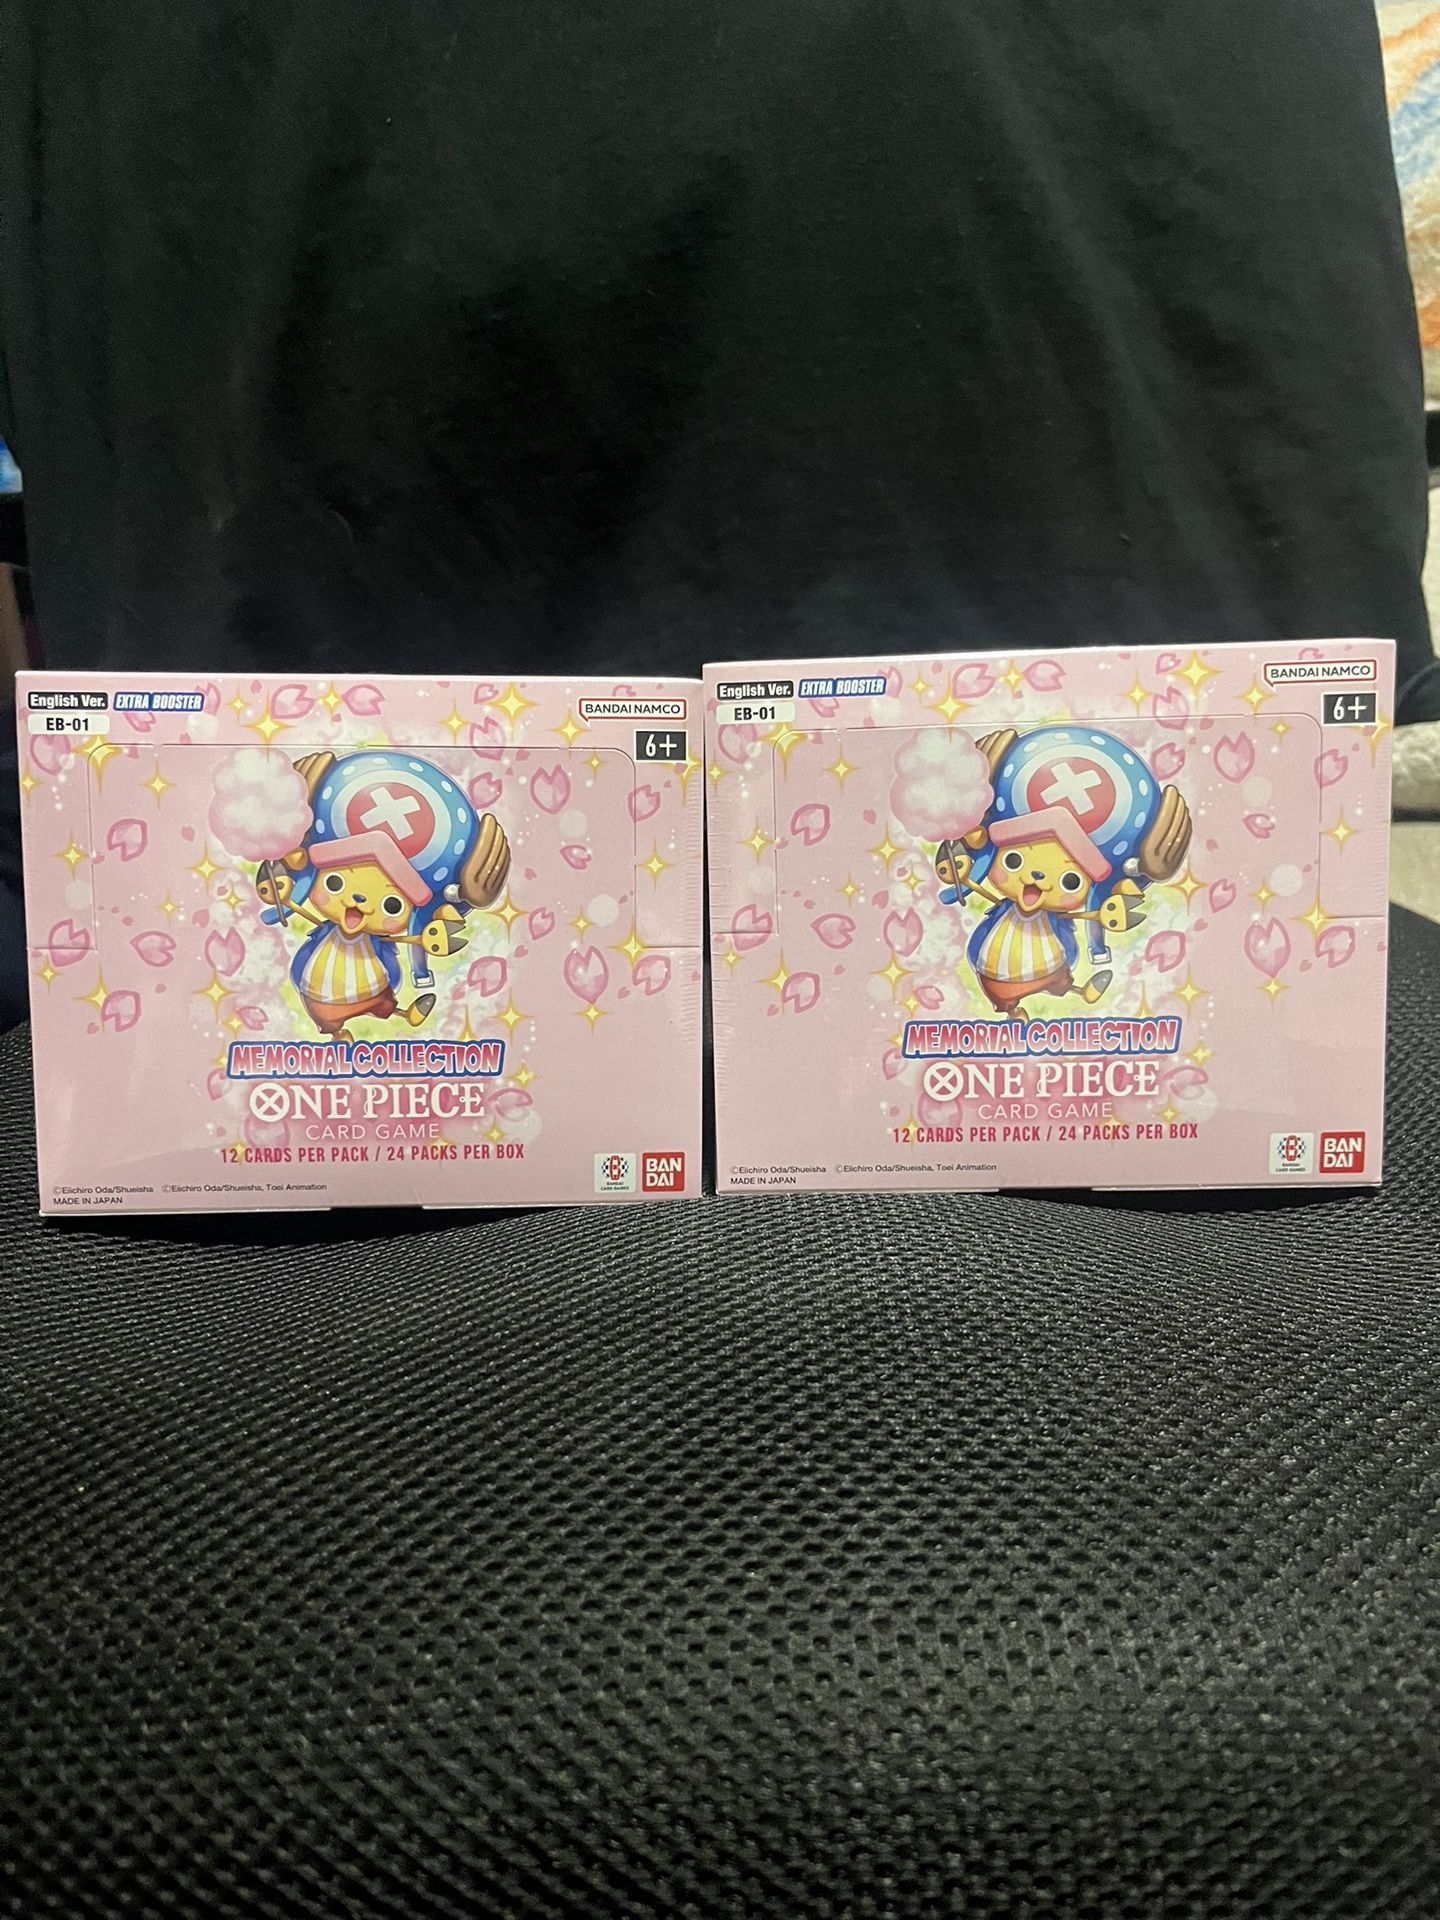 One Piece EB-01 Memorial Collection Booster Box